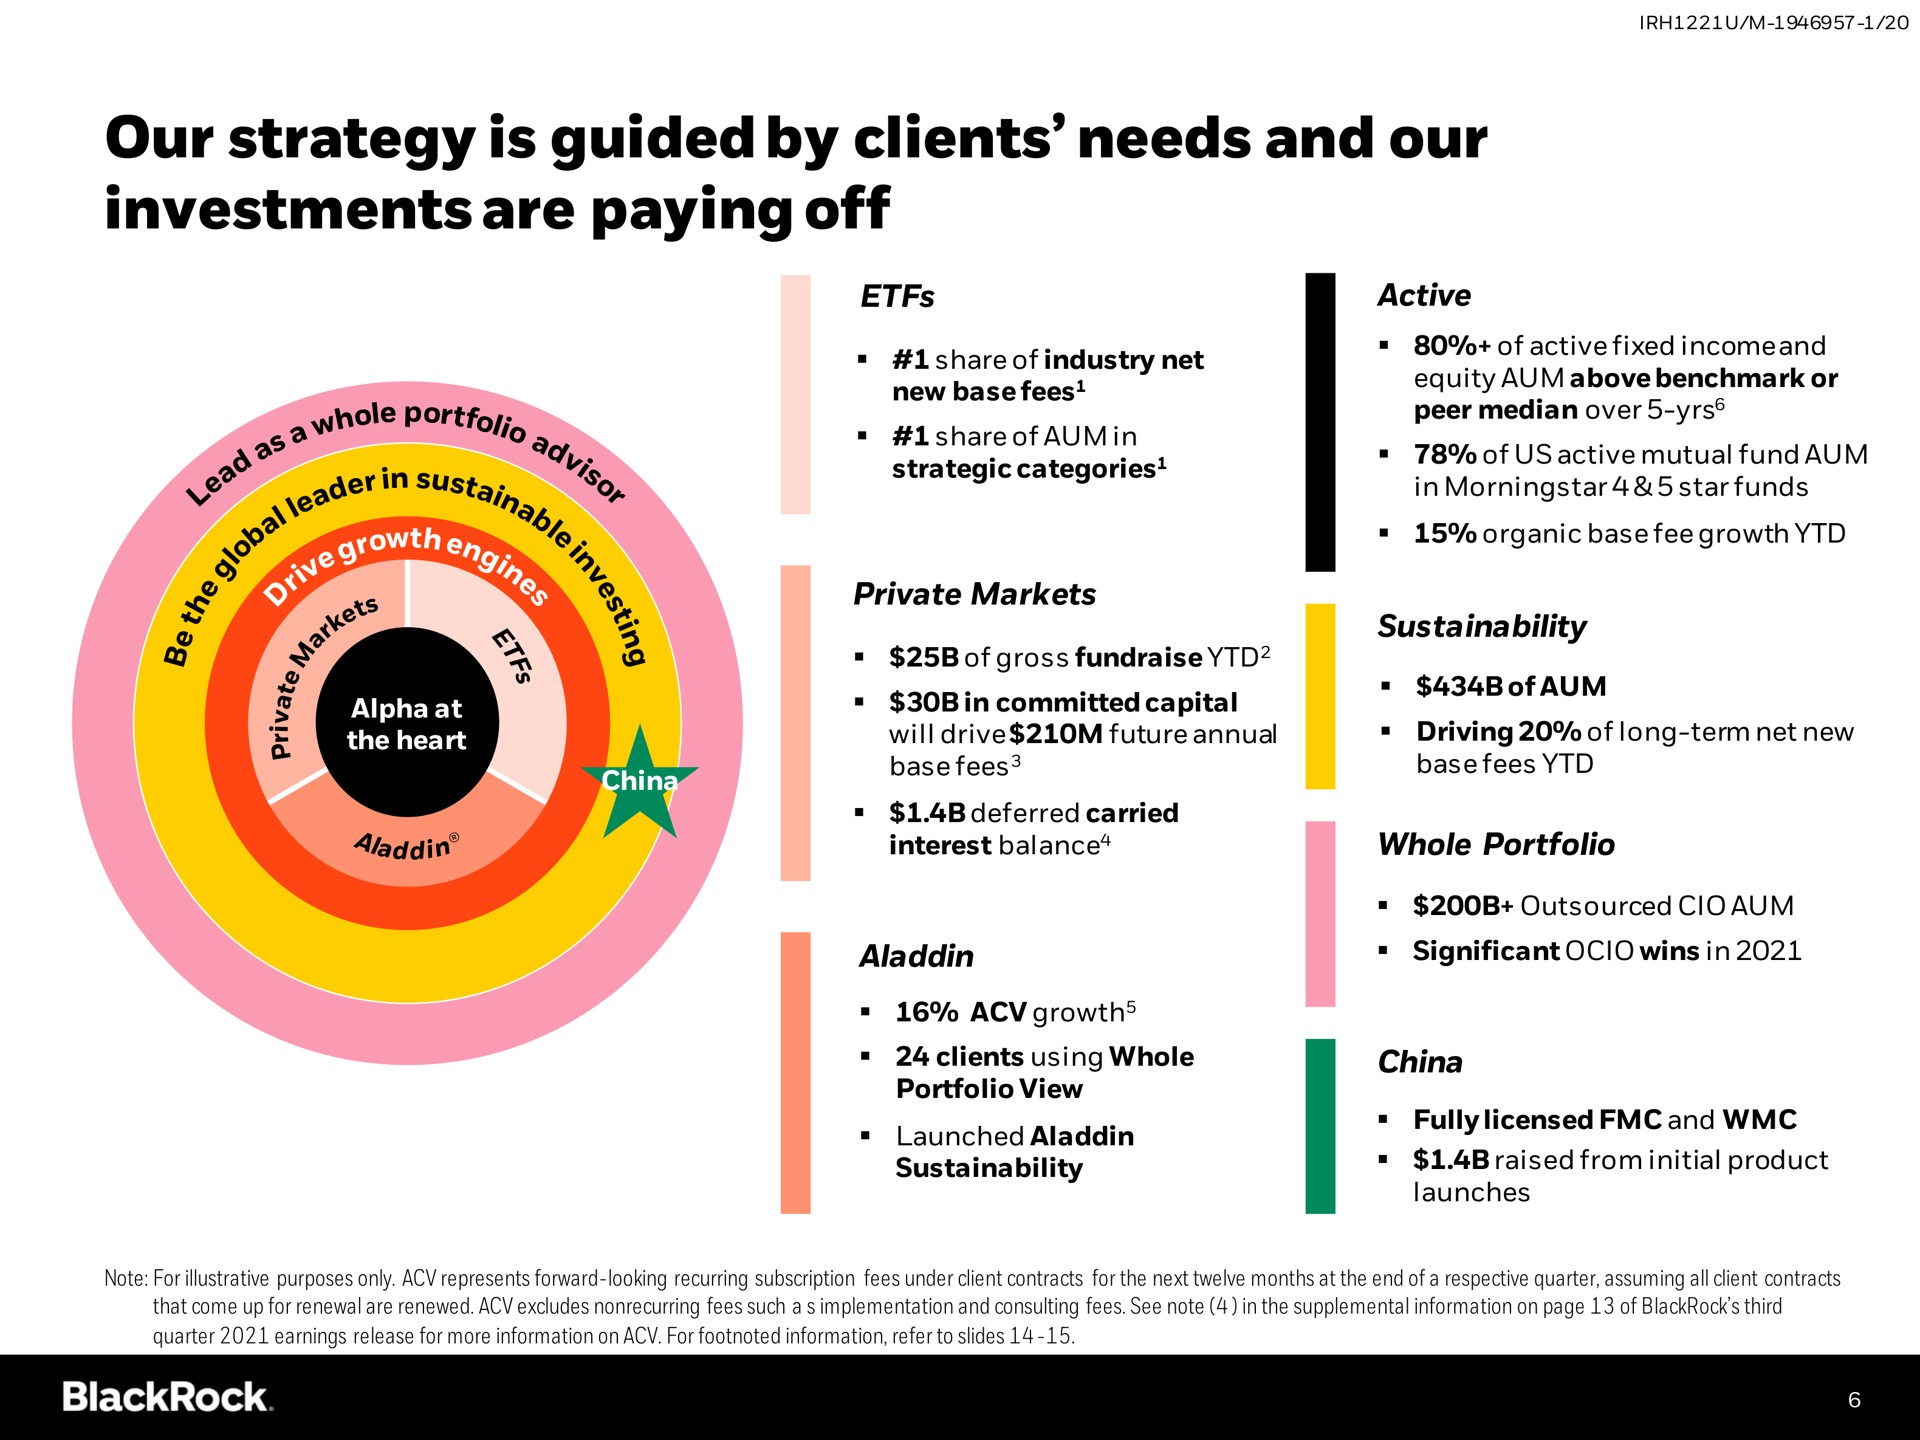 our strategy is guided by clients needs and our investments are paying off | BlackRock